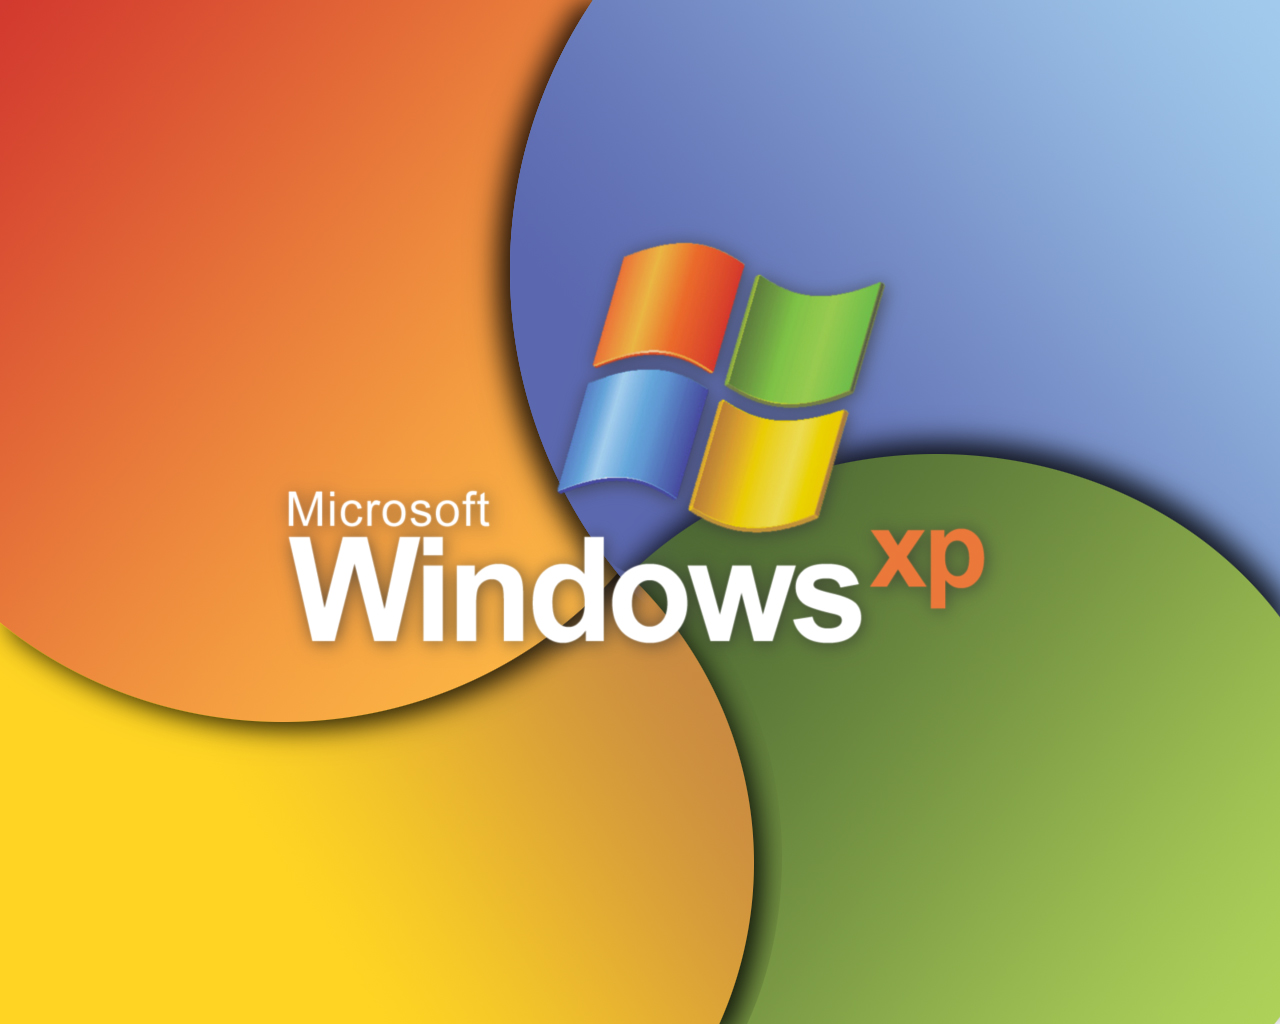 Support for Windows XP and Vista ending soon - Announcements